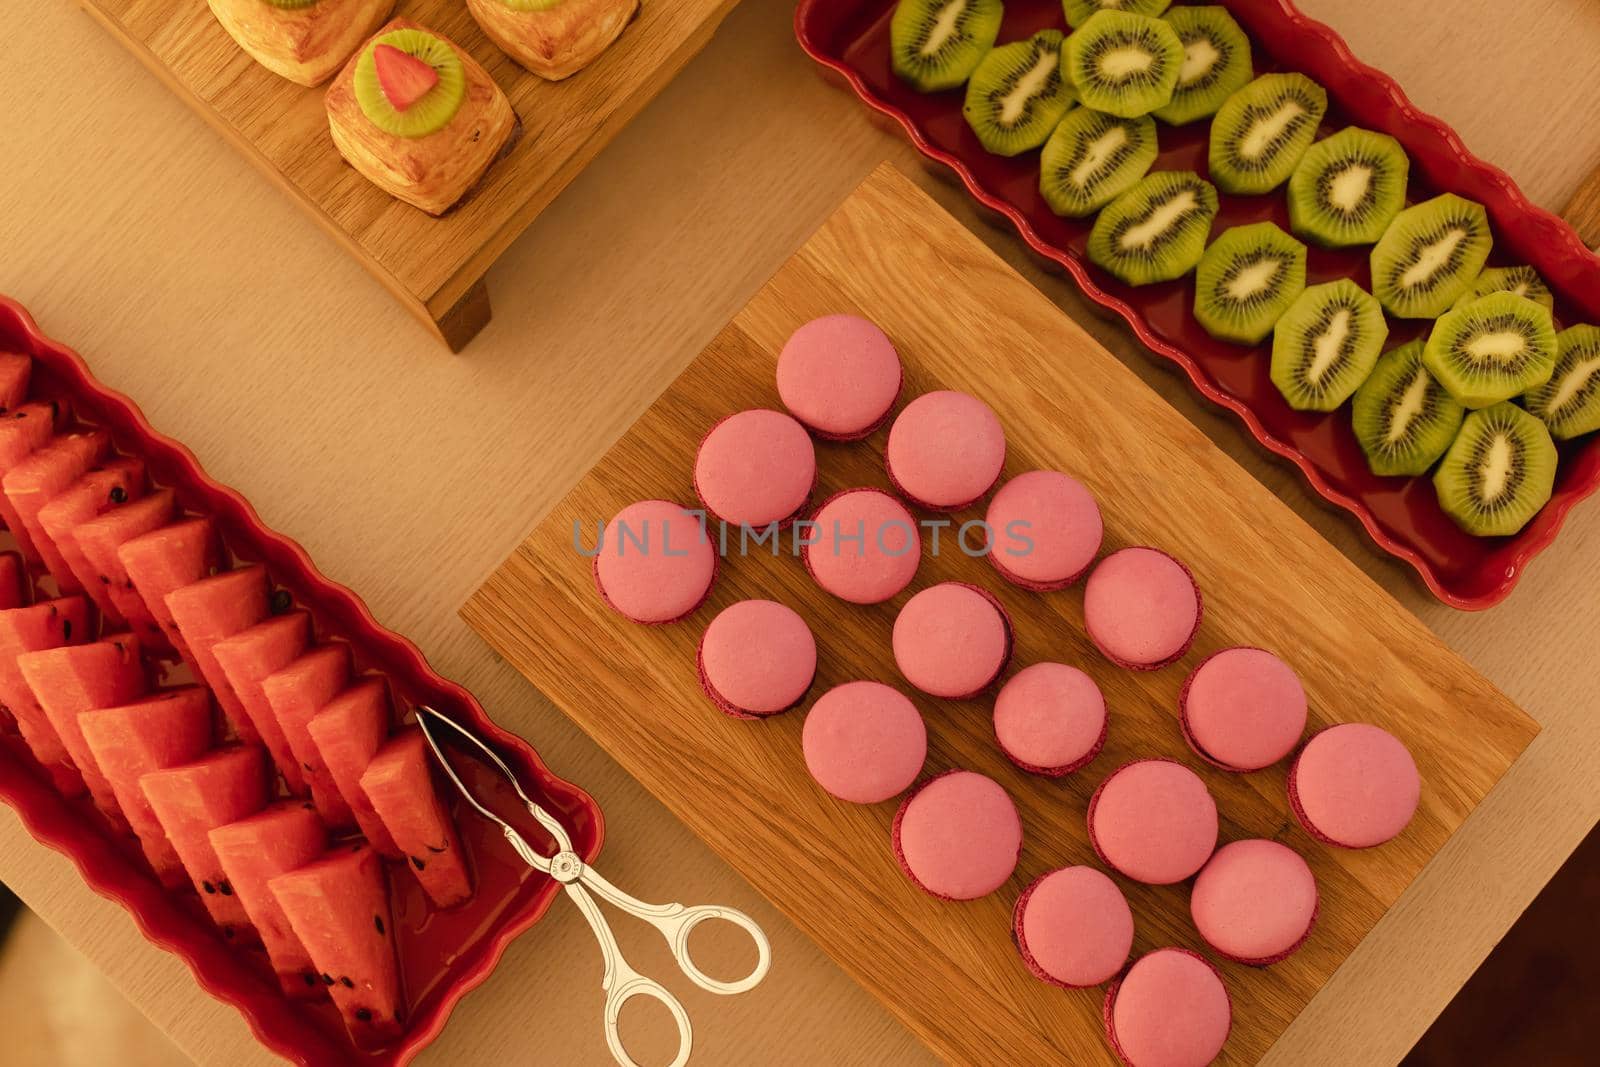 From above appetizing pink macaroons fresh watermelon and sliced kiwi fruit served on cutting boards and red dishes